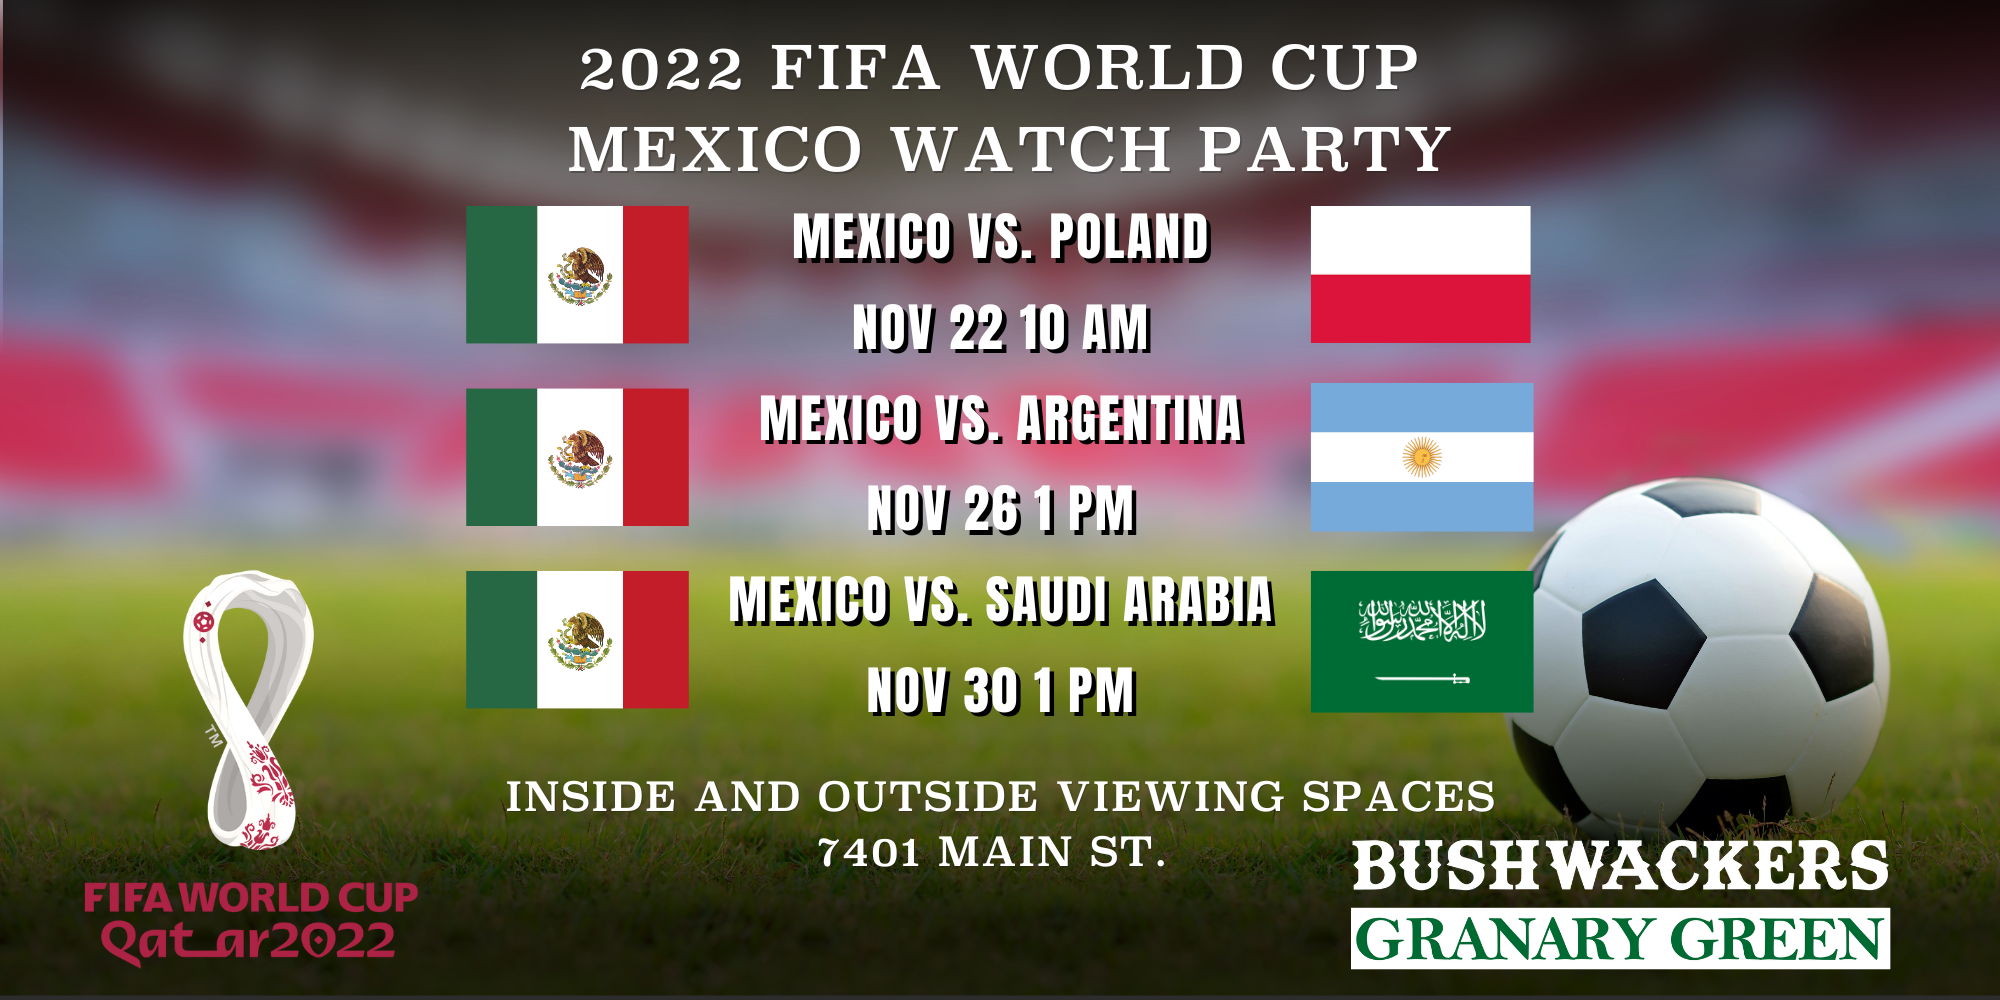 FIFA WC Mexico Watch Party - Mexico v. Saudi Arabia promotional image